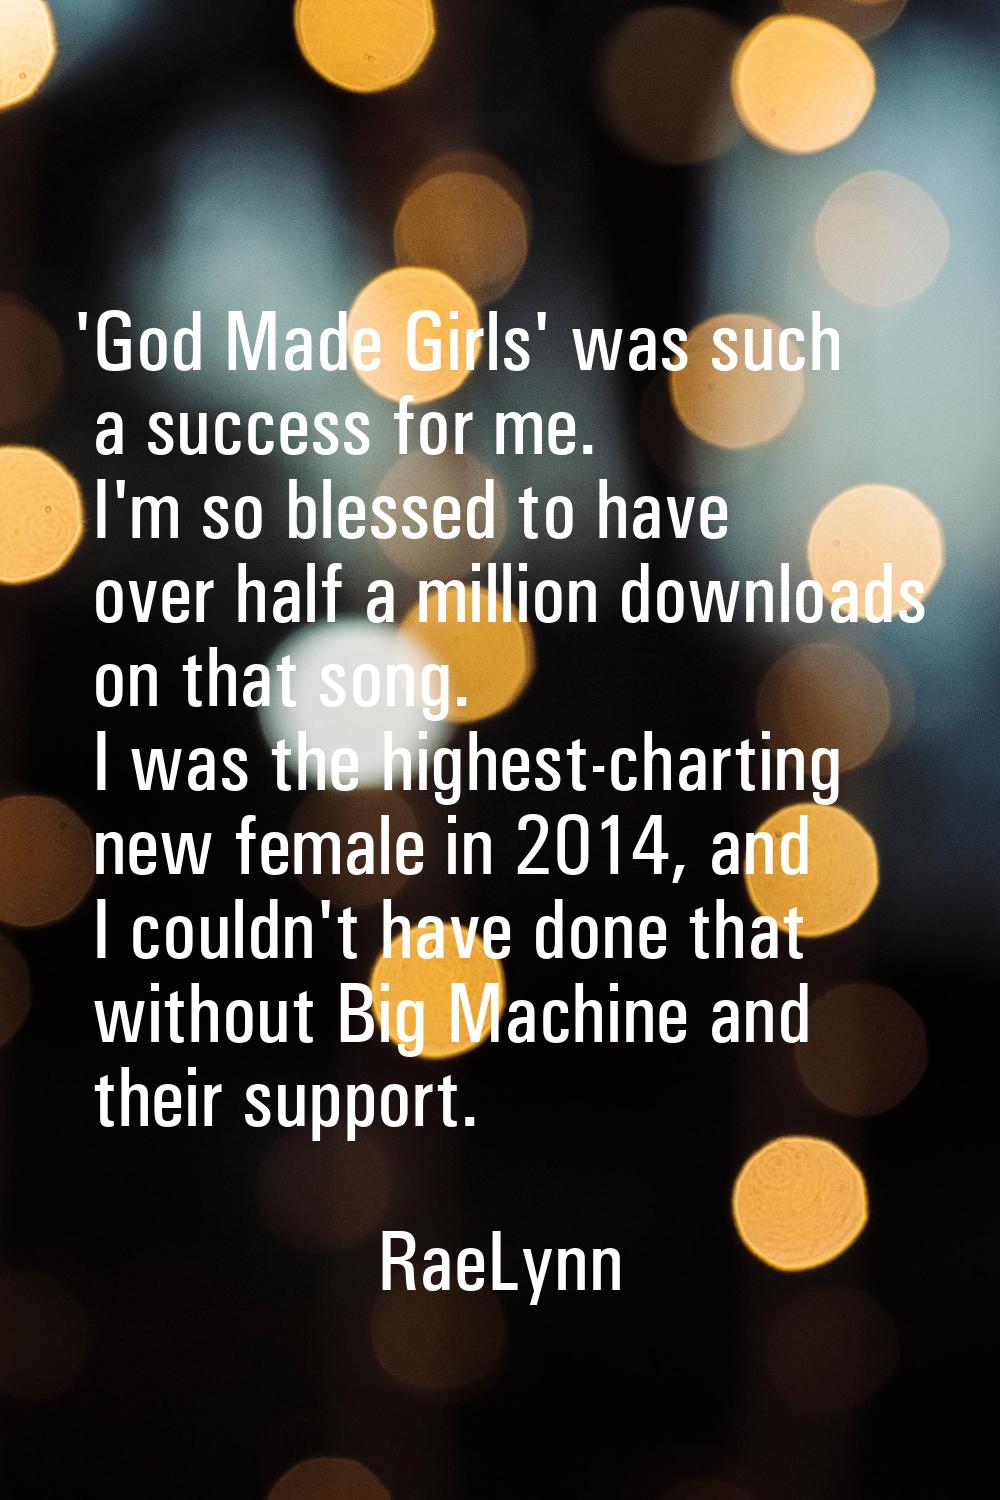 'God Made Girls' was such a success for me. I'm so blessed to have over half a million downloads on